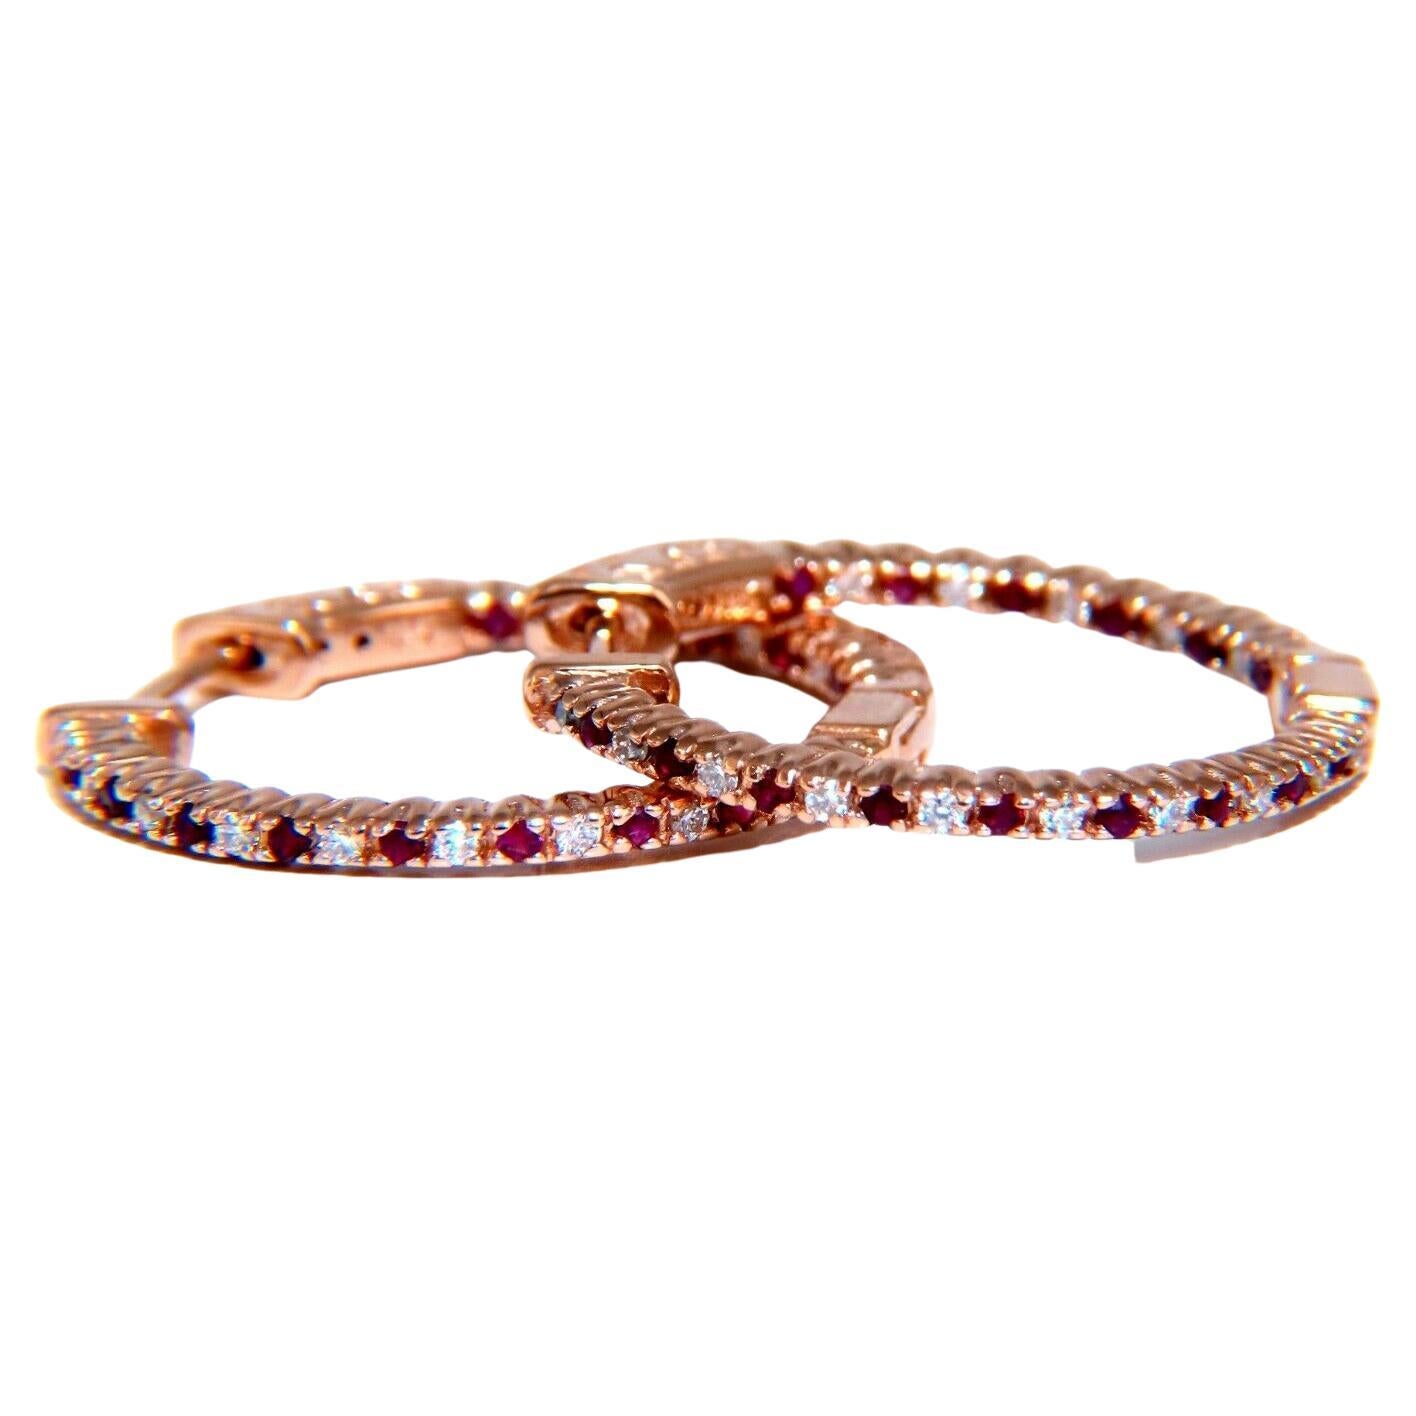 .58ct Natural Ruby Diamonds Hoop Earrings 14kt Rose Gold Inside Out